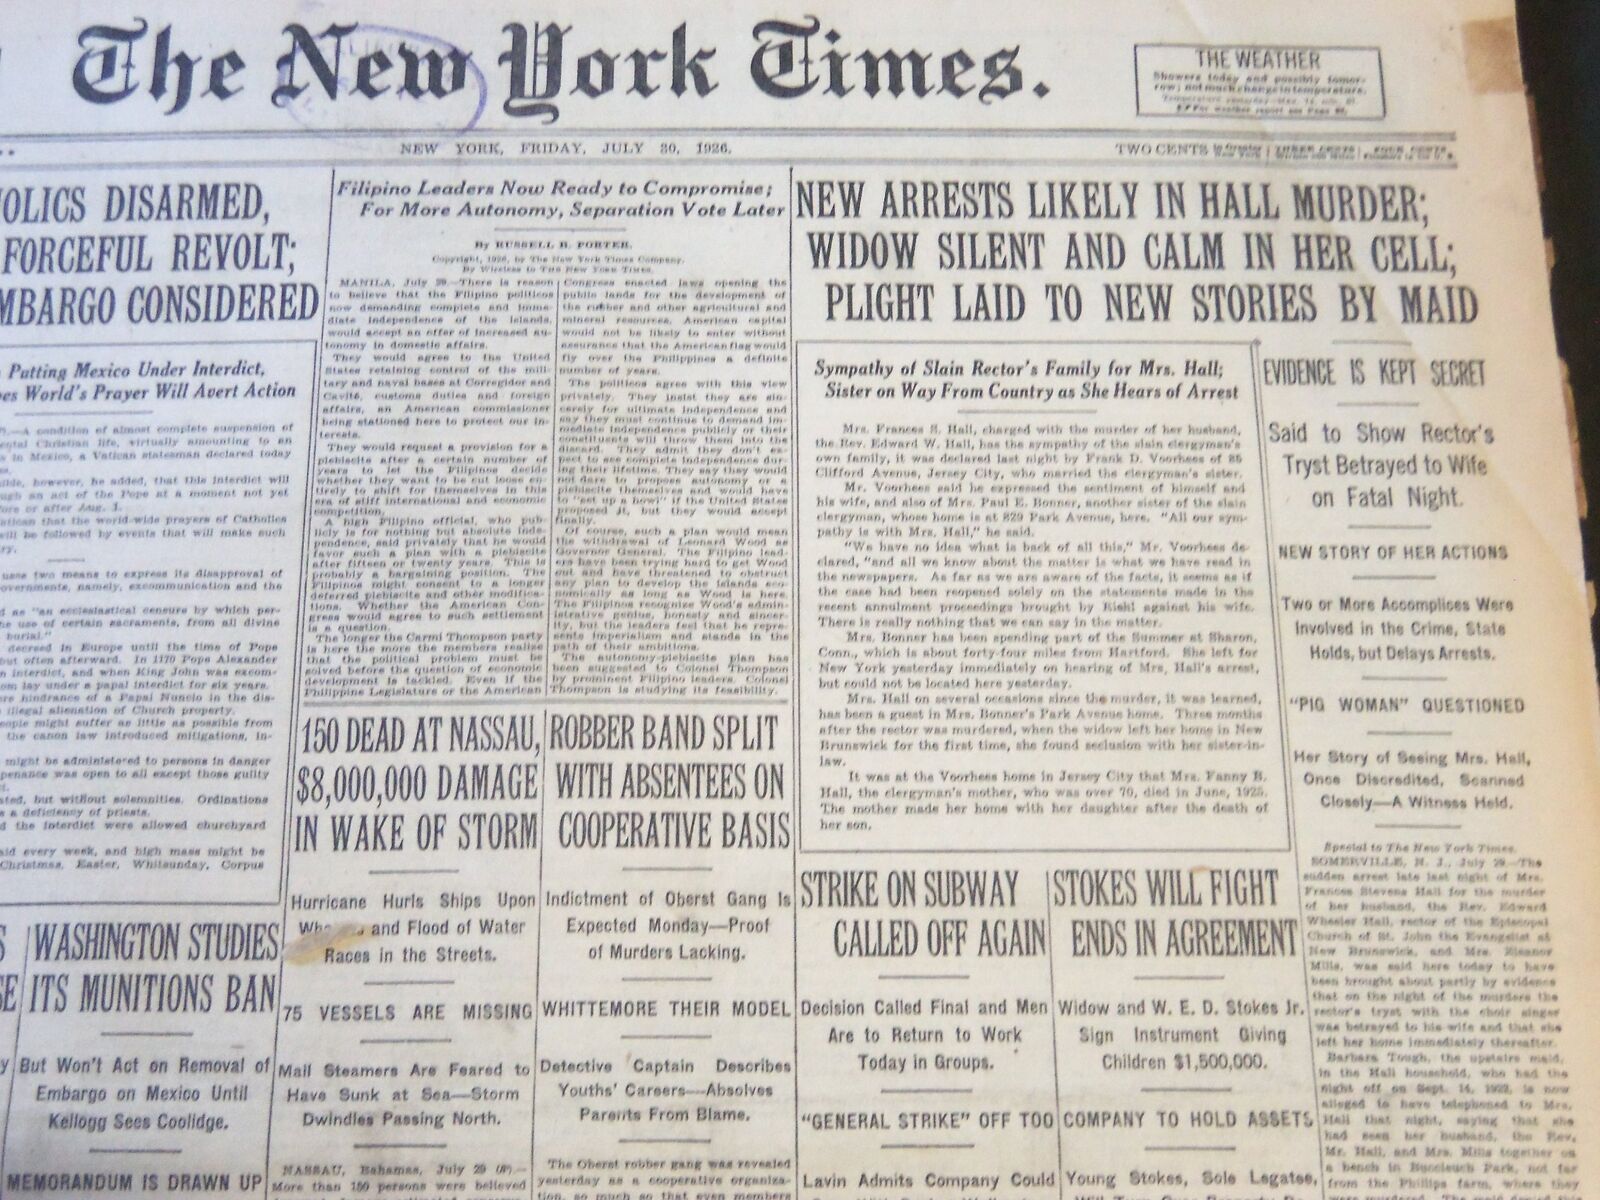 1926 JULY 30 NEW YORK TIMES - NEW ARRESTS LIKELY IN HALL MURDER - NT 6597